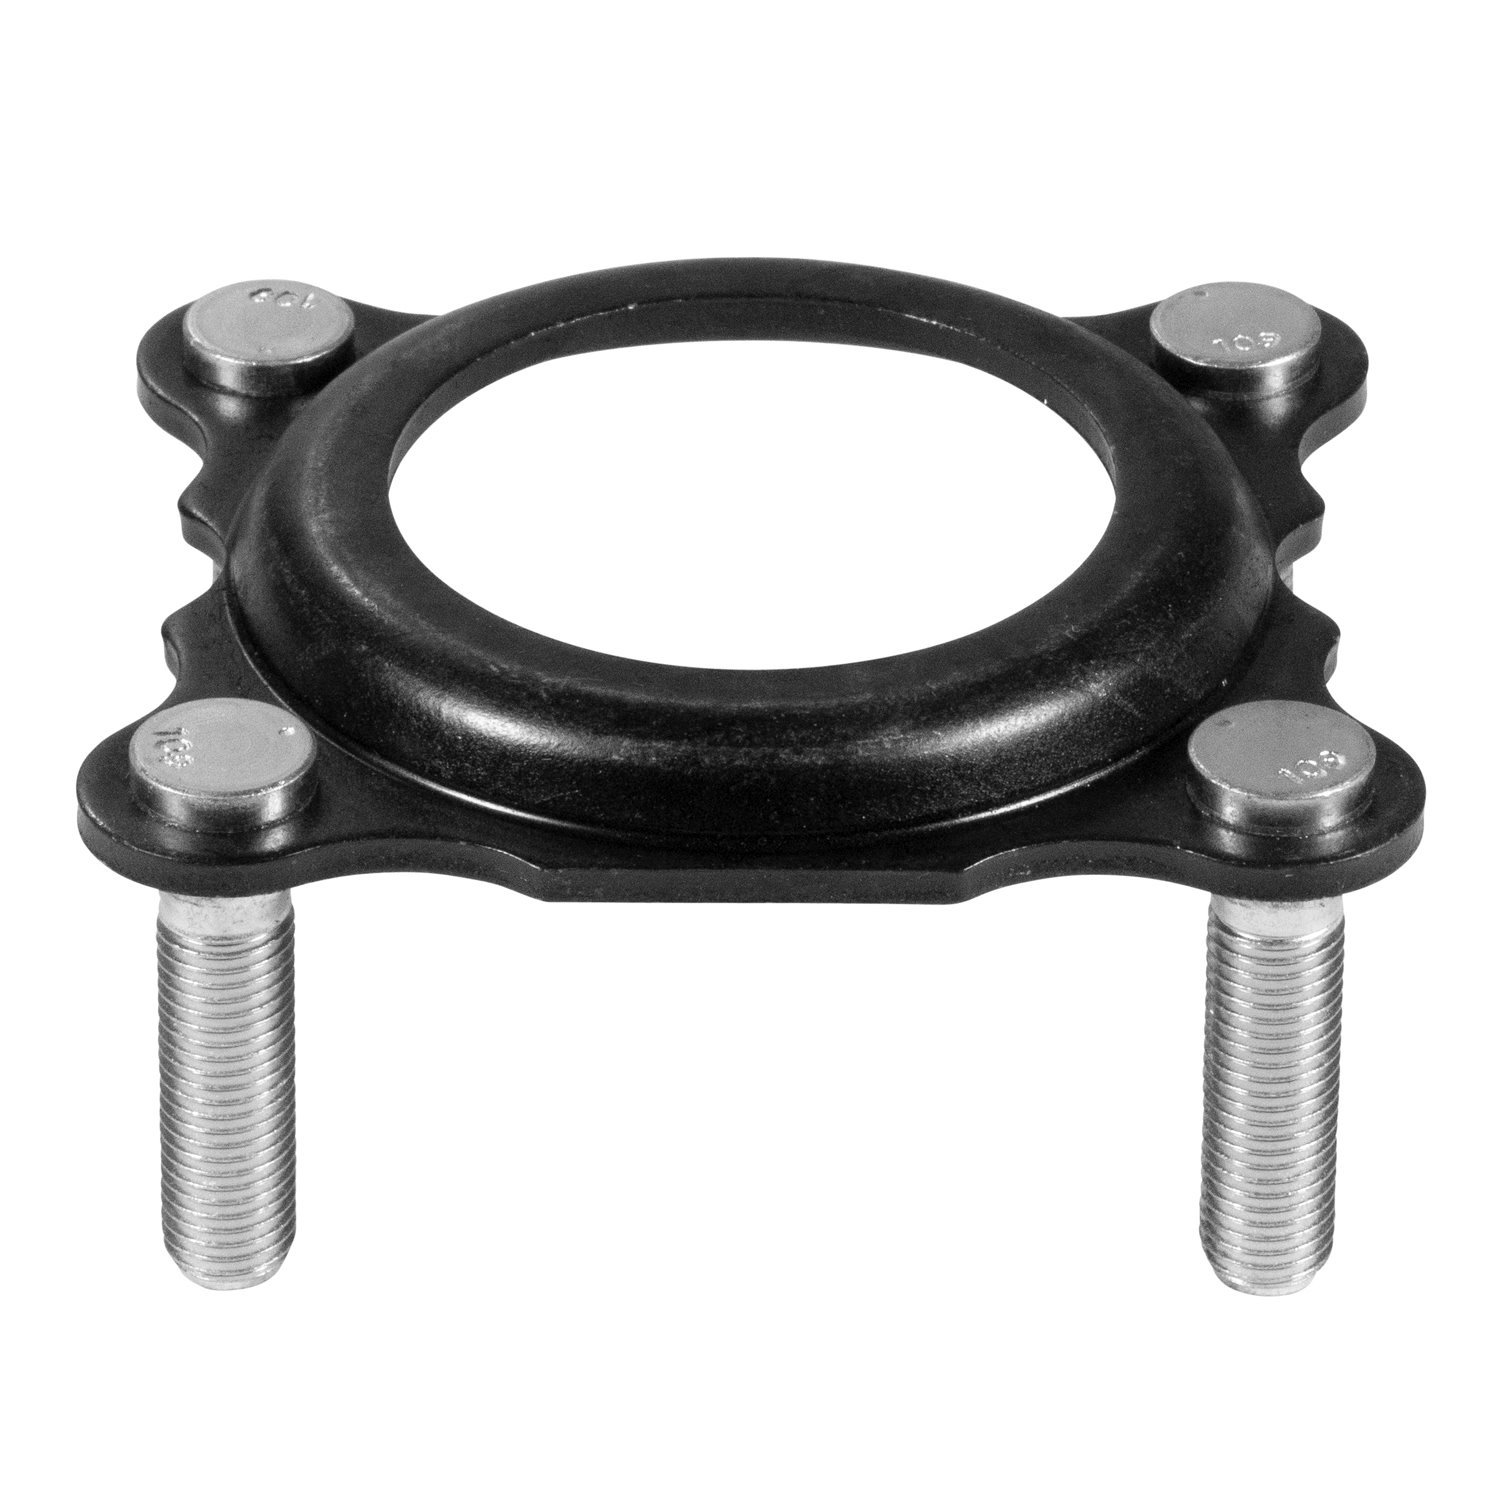 Rear Axle Bearing Retainer For Dana 35, With Studs